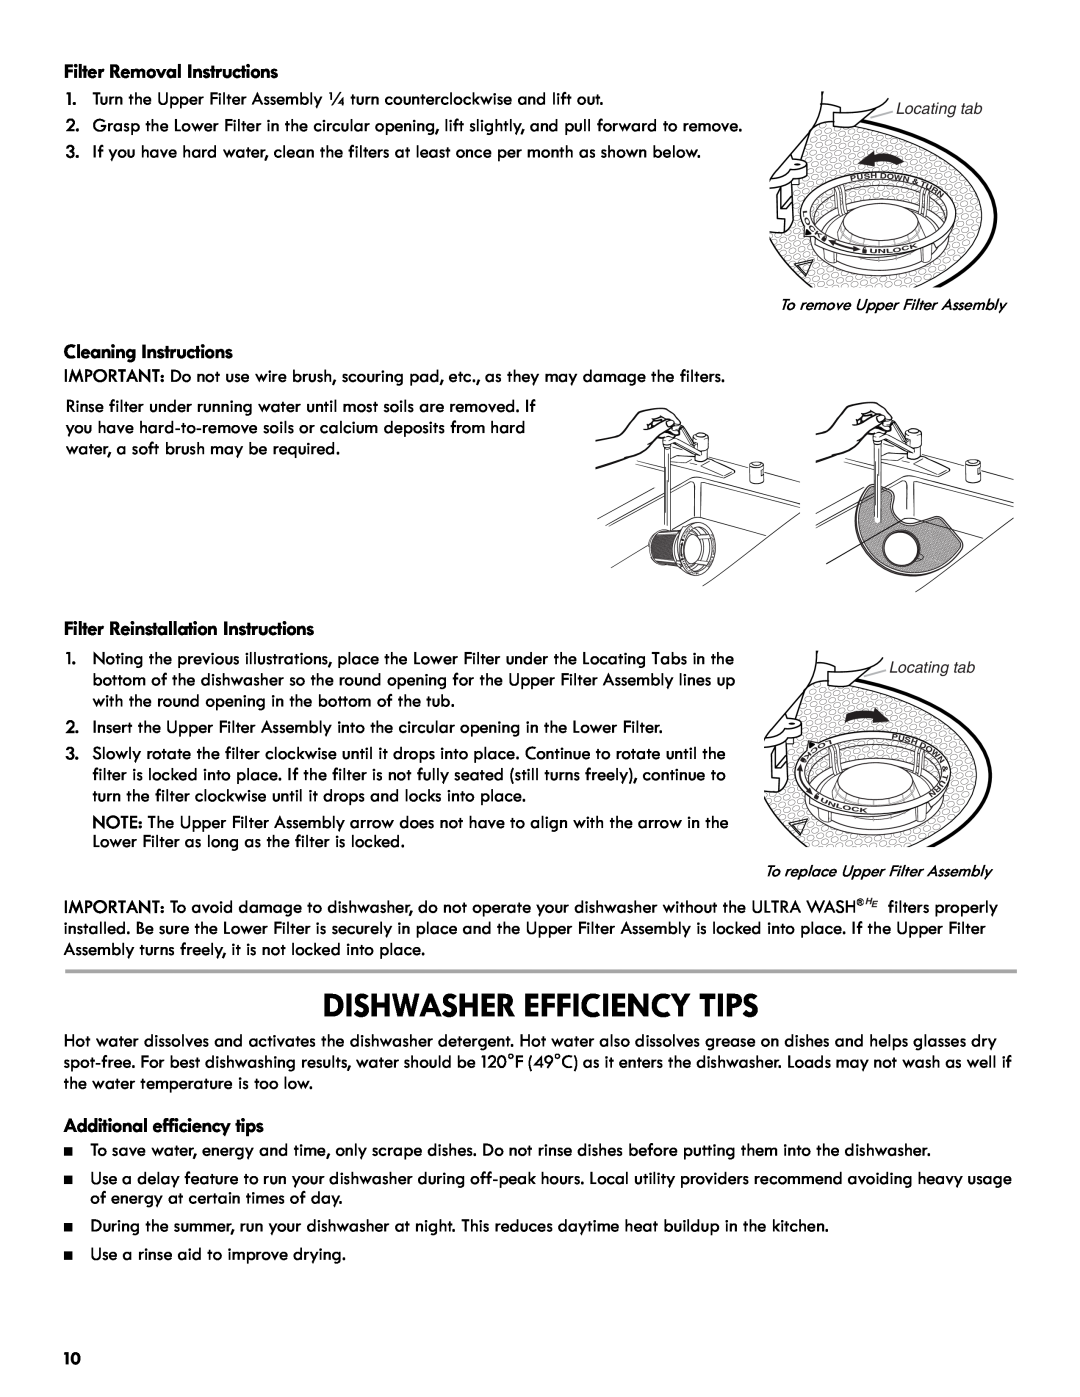 Kenmore 665.1301 manual Dishwasher Efficiency Tips, Filter Removal Instructions, Cleaning Instructions 